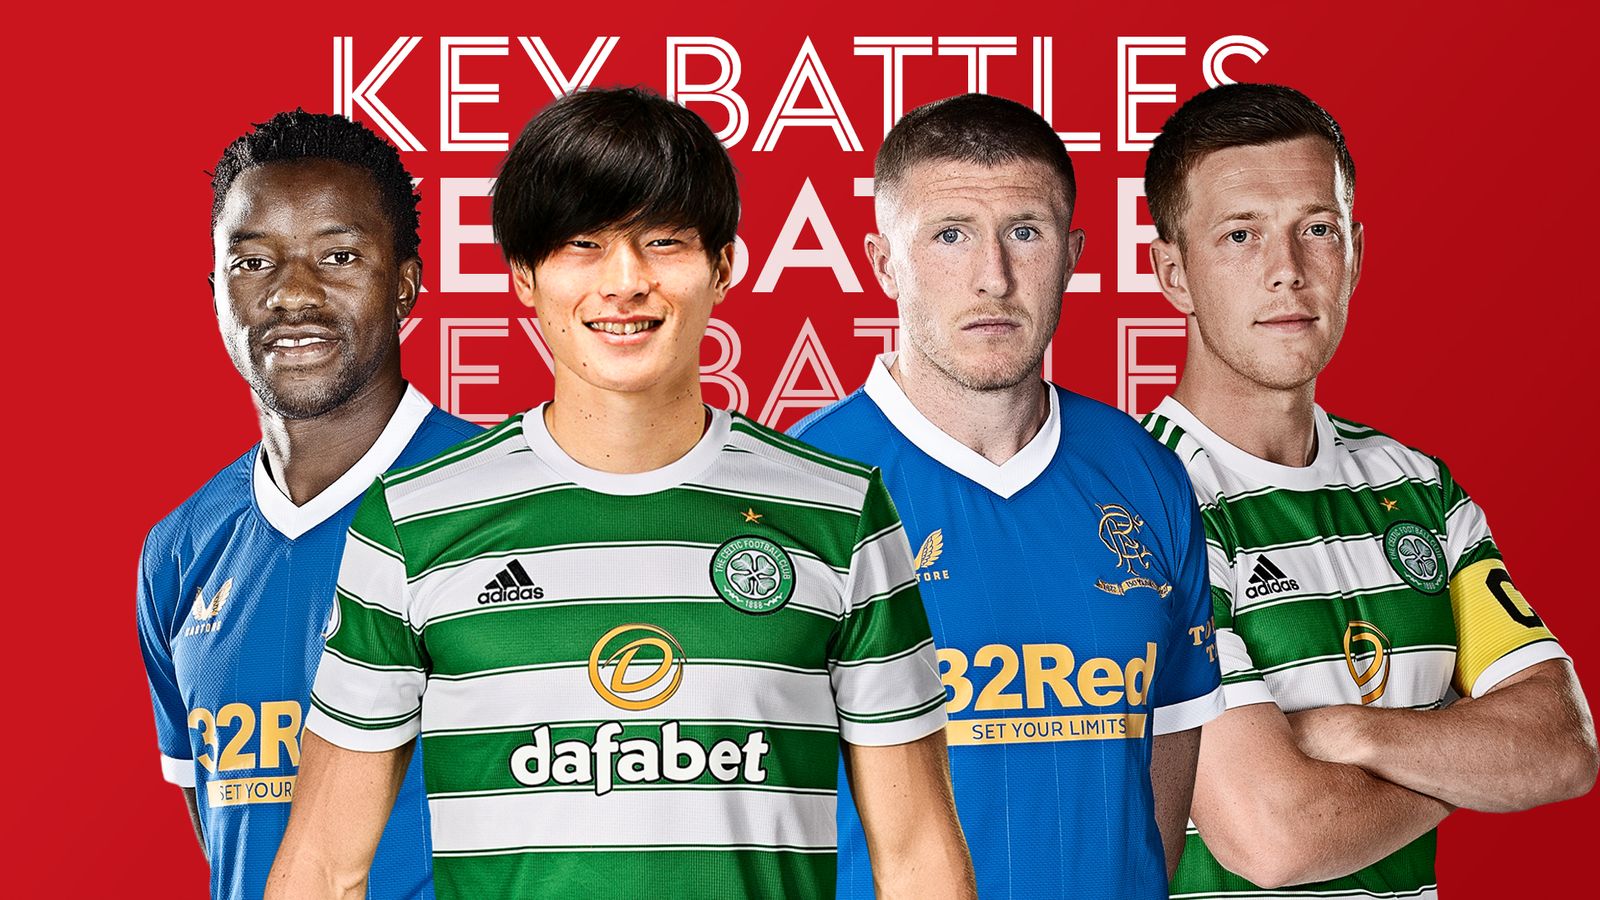 Classic Football Shirts Manchester on X: Celtic v Rangers tonight, 2  points separate them! We have plenty of both teams shirts in-store!  🏴󠁧󠁢󠁳󠁣󠁴󠁿  / X